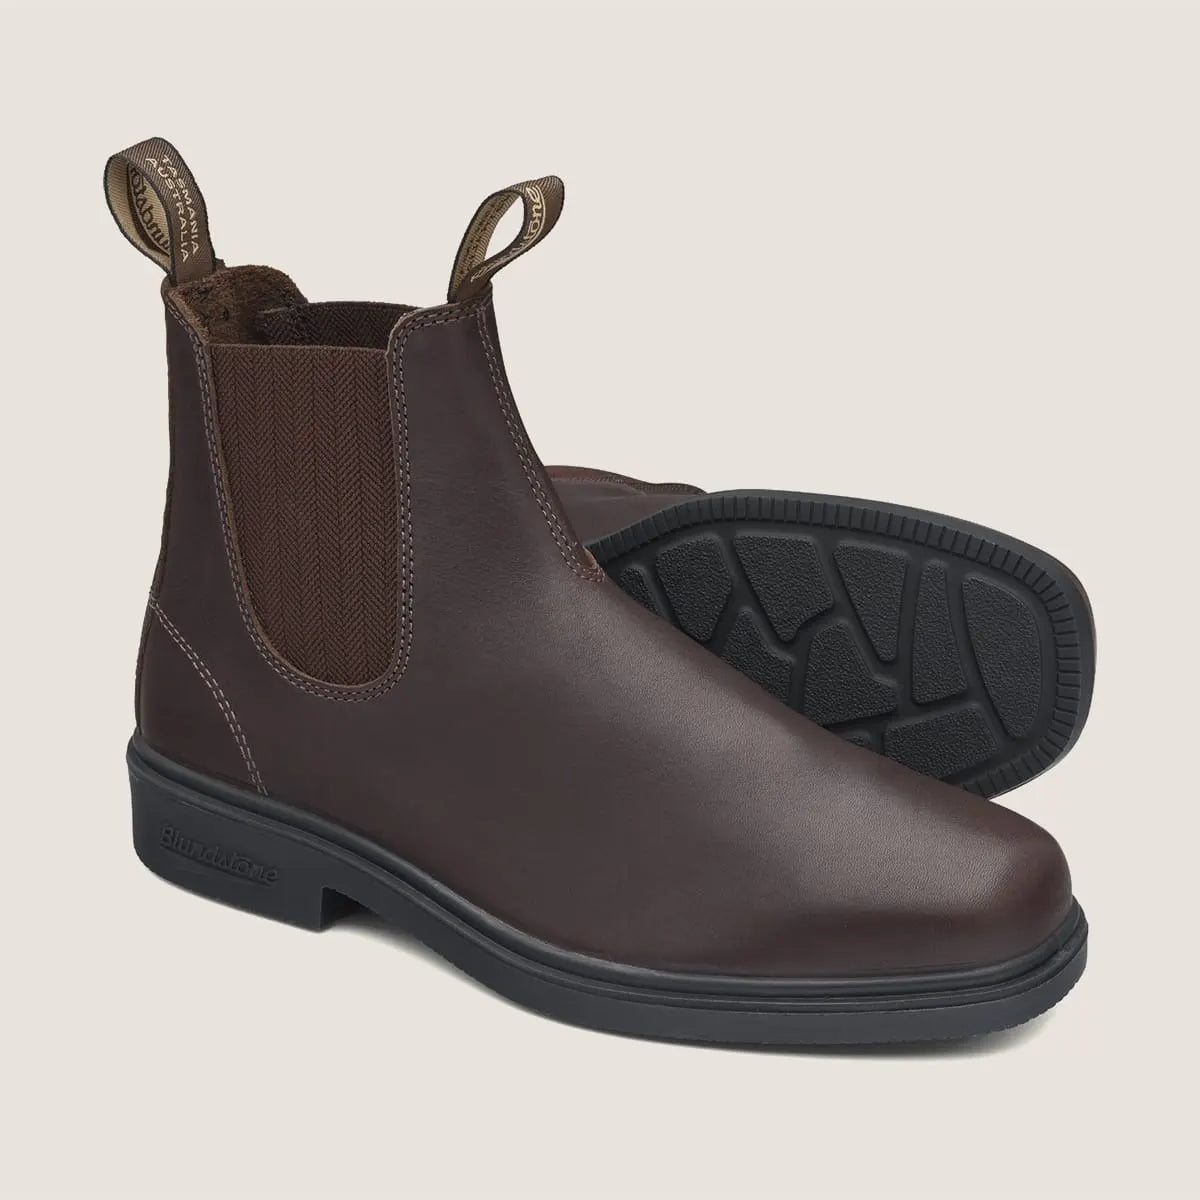 Blundstone 659 Elastic Sided Dress Boots in Brown